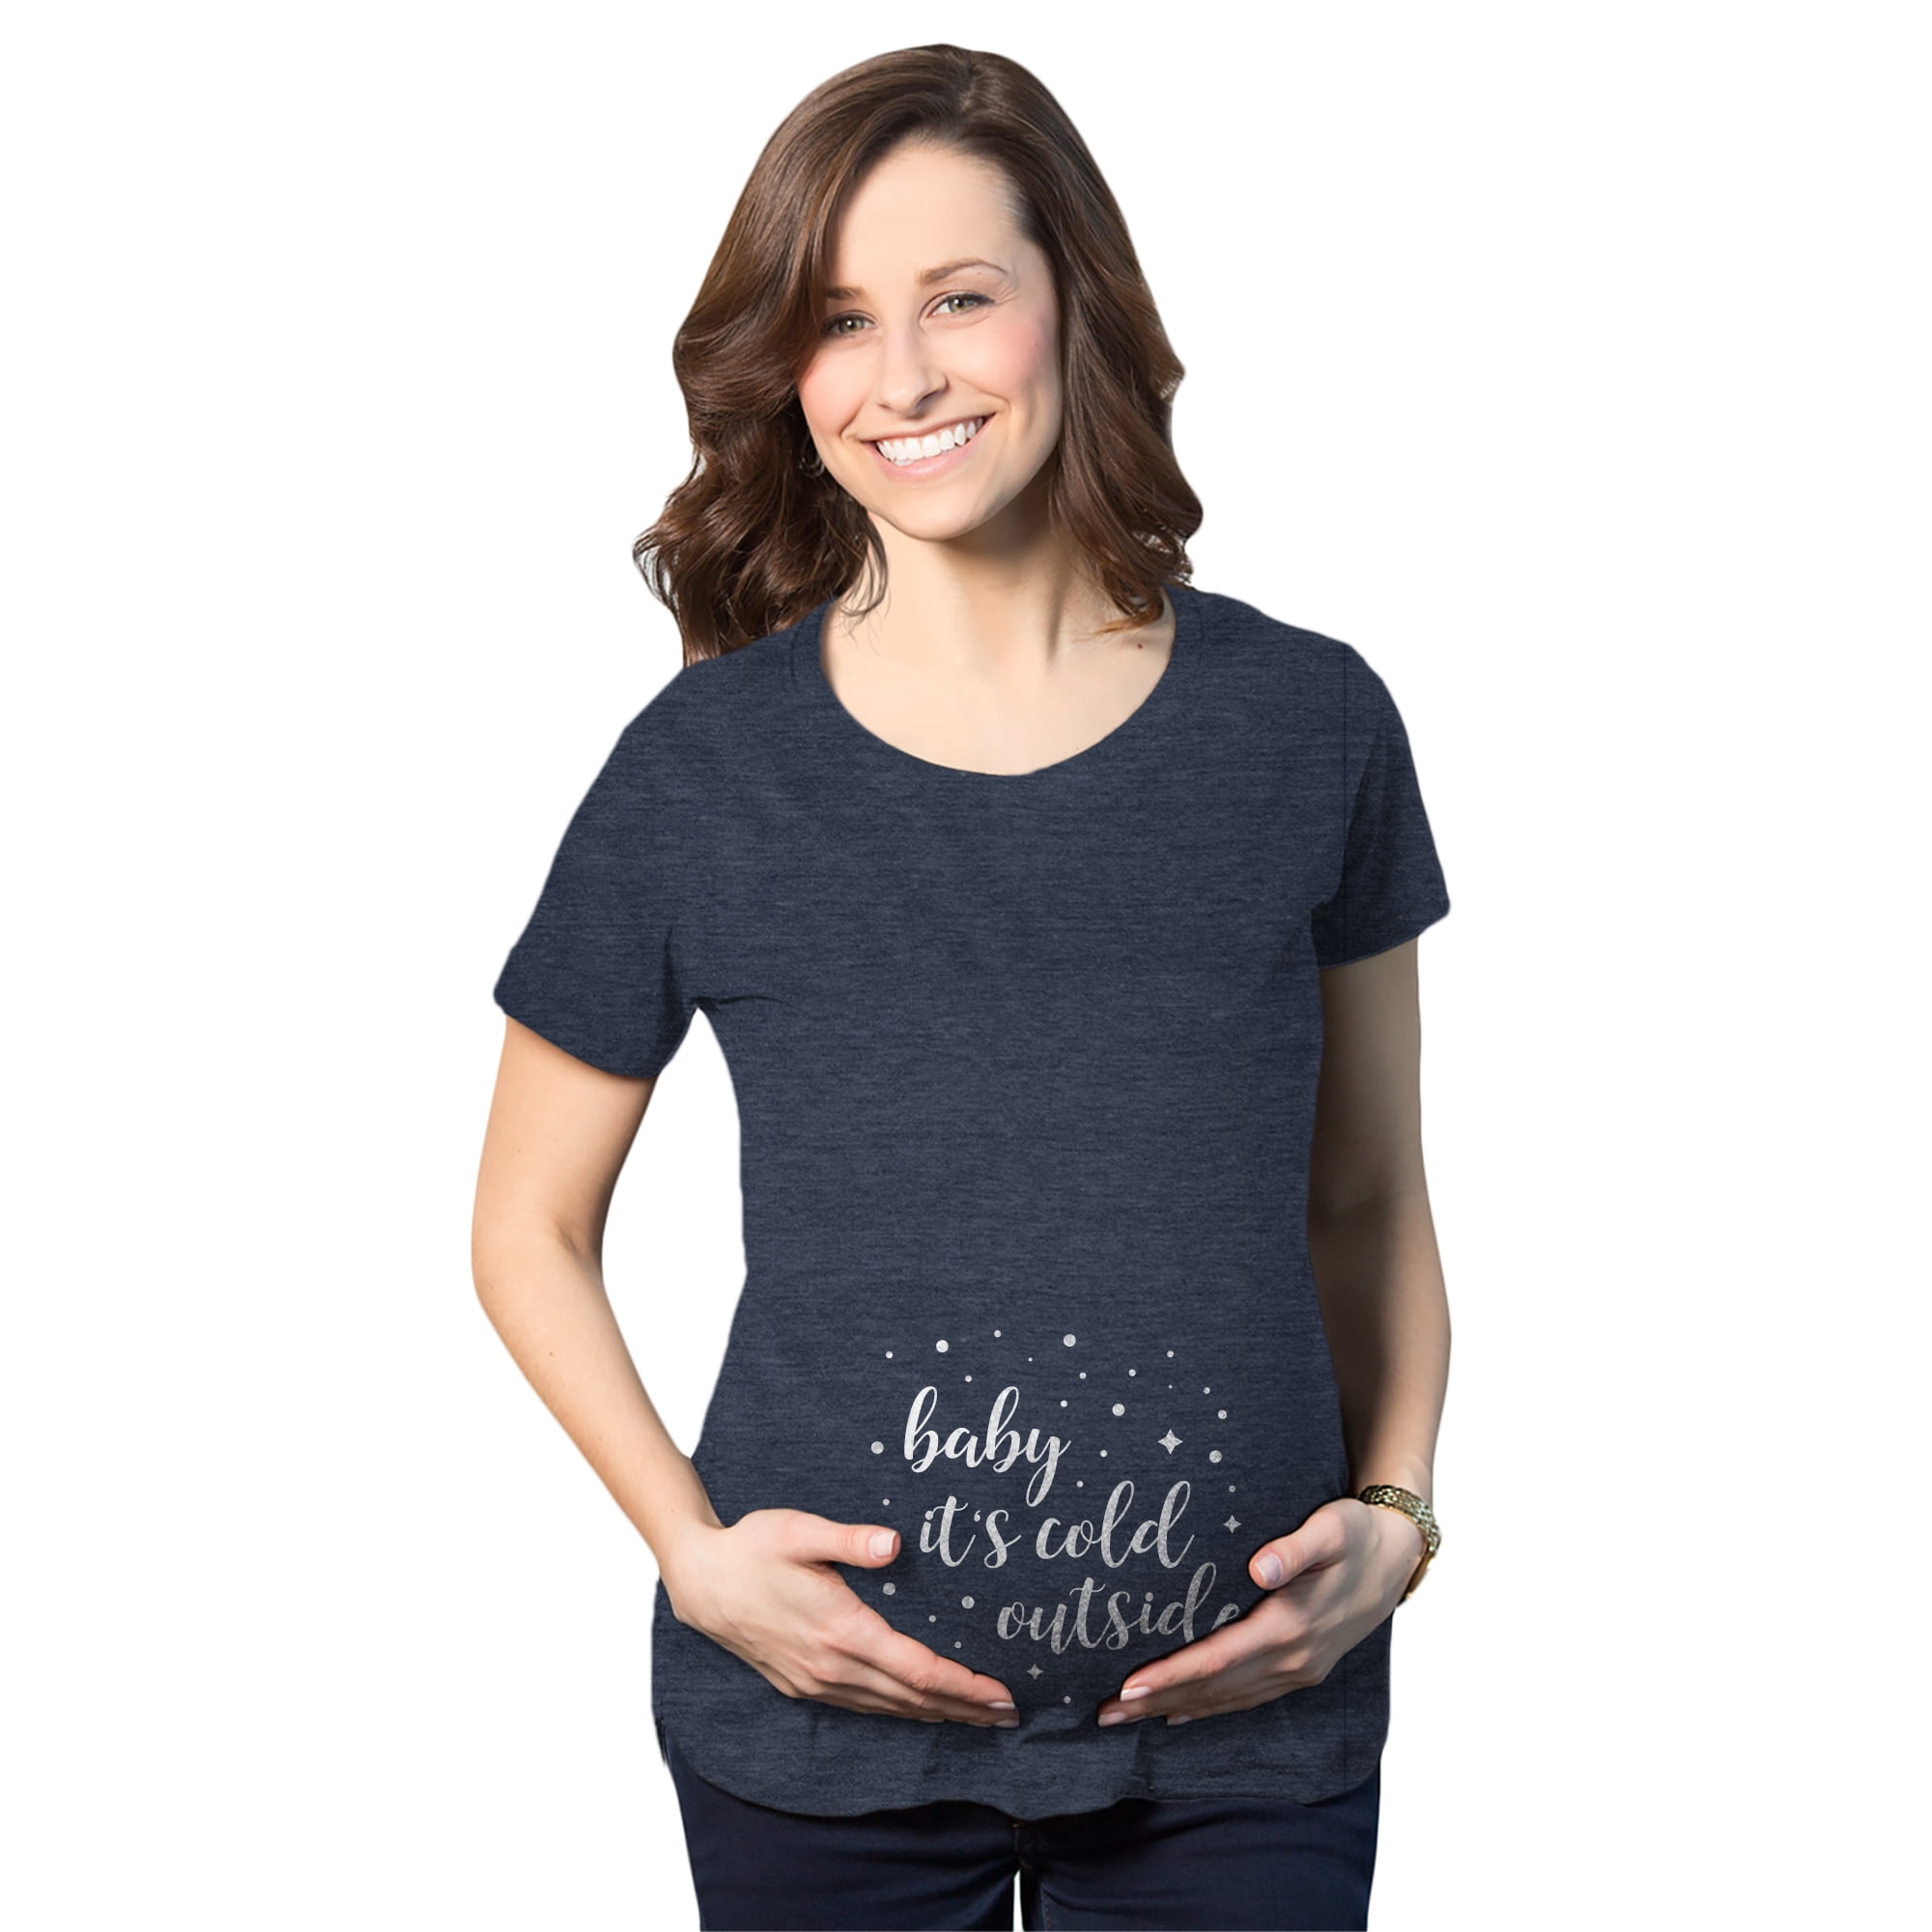 Maternity Themed T-Shirt Hands off the Bump Womens Pregnancy 